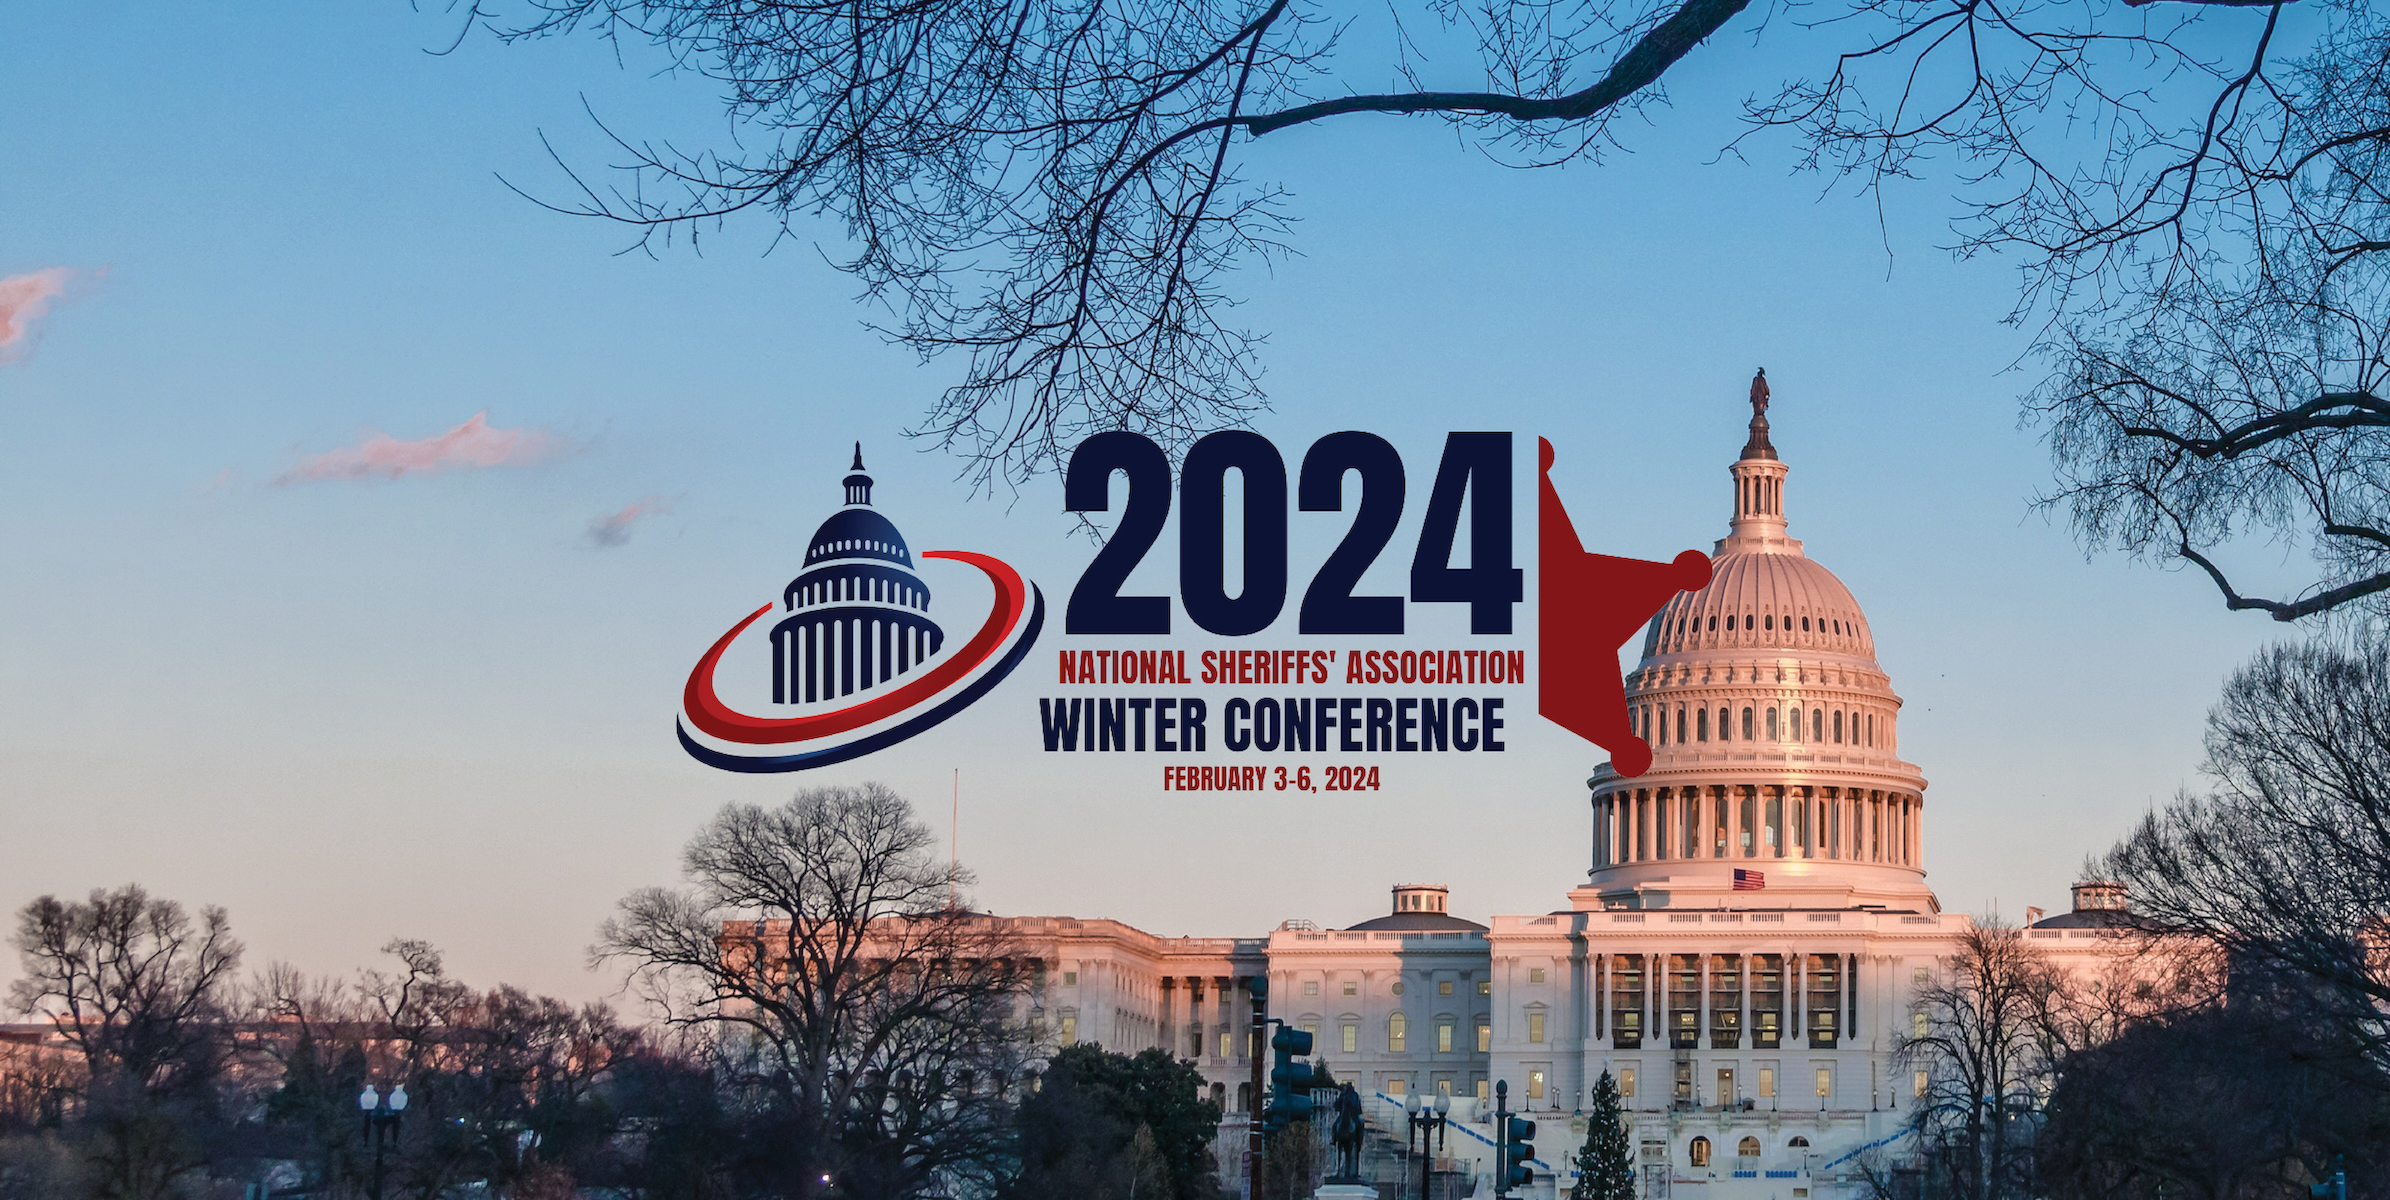 Join NEWCOM at the NSA 2024 Winter Conference